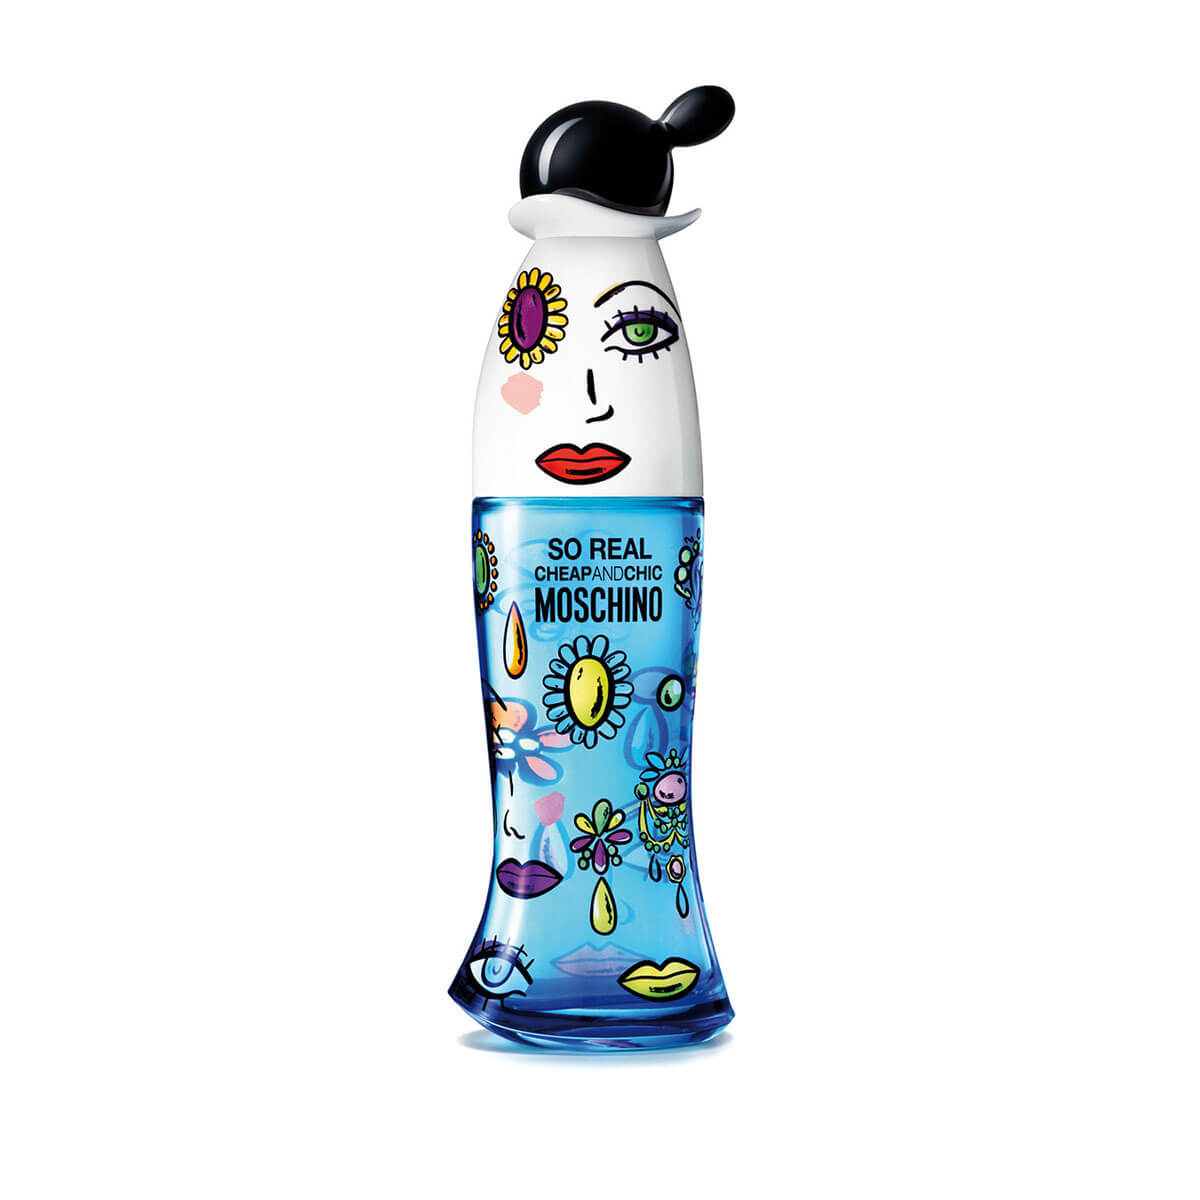 Moschino Cheap And Chic So Real Eau de Toilette